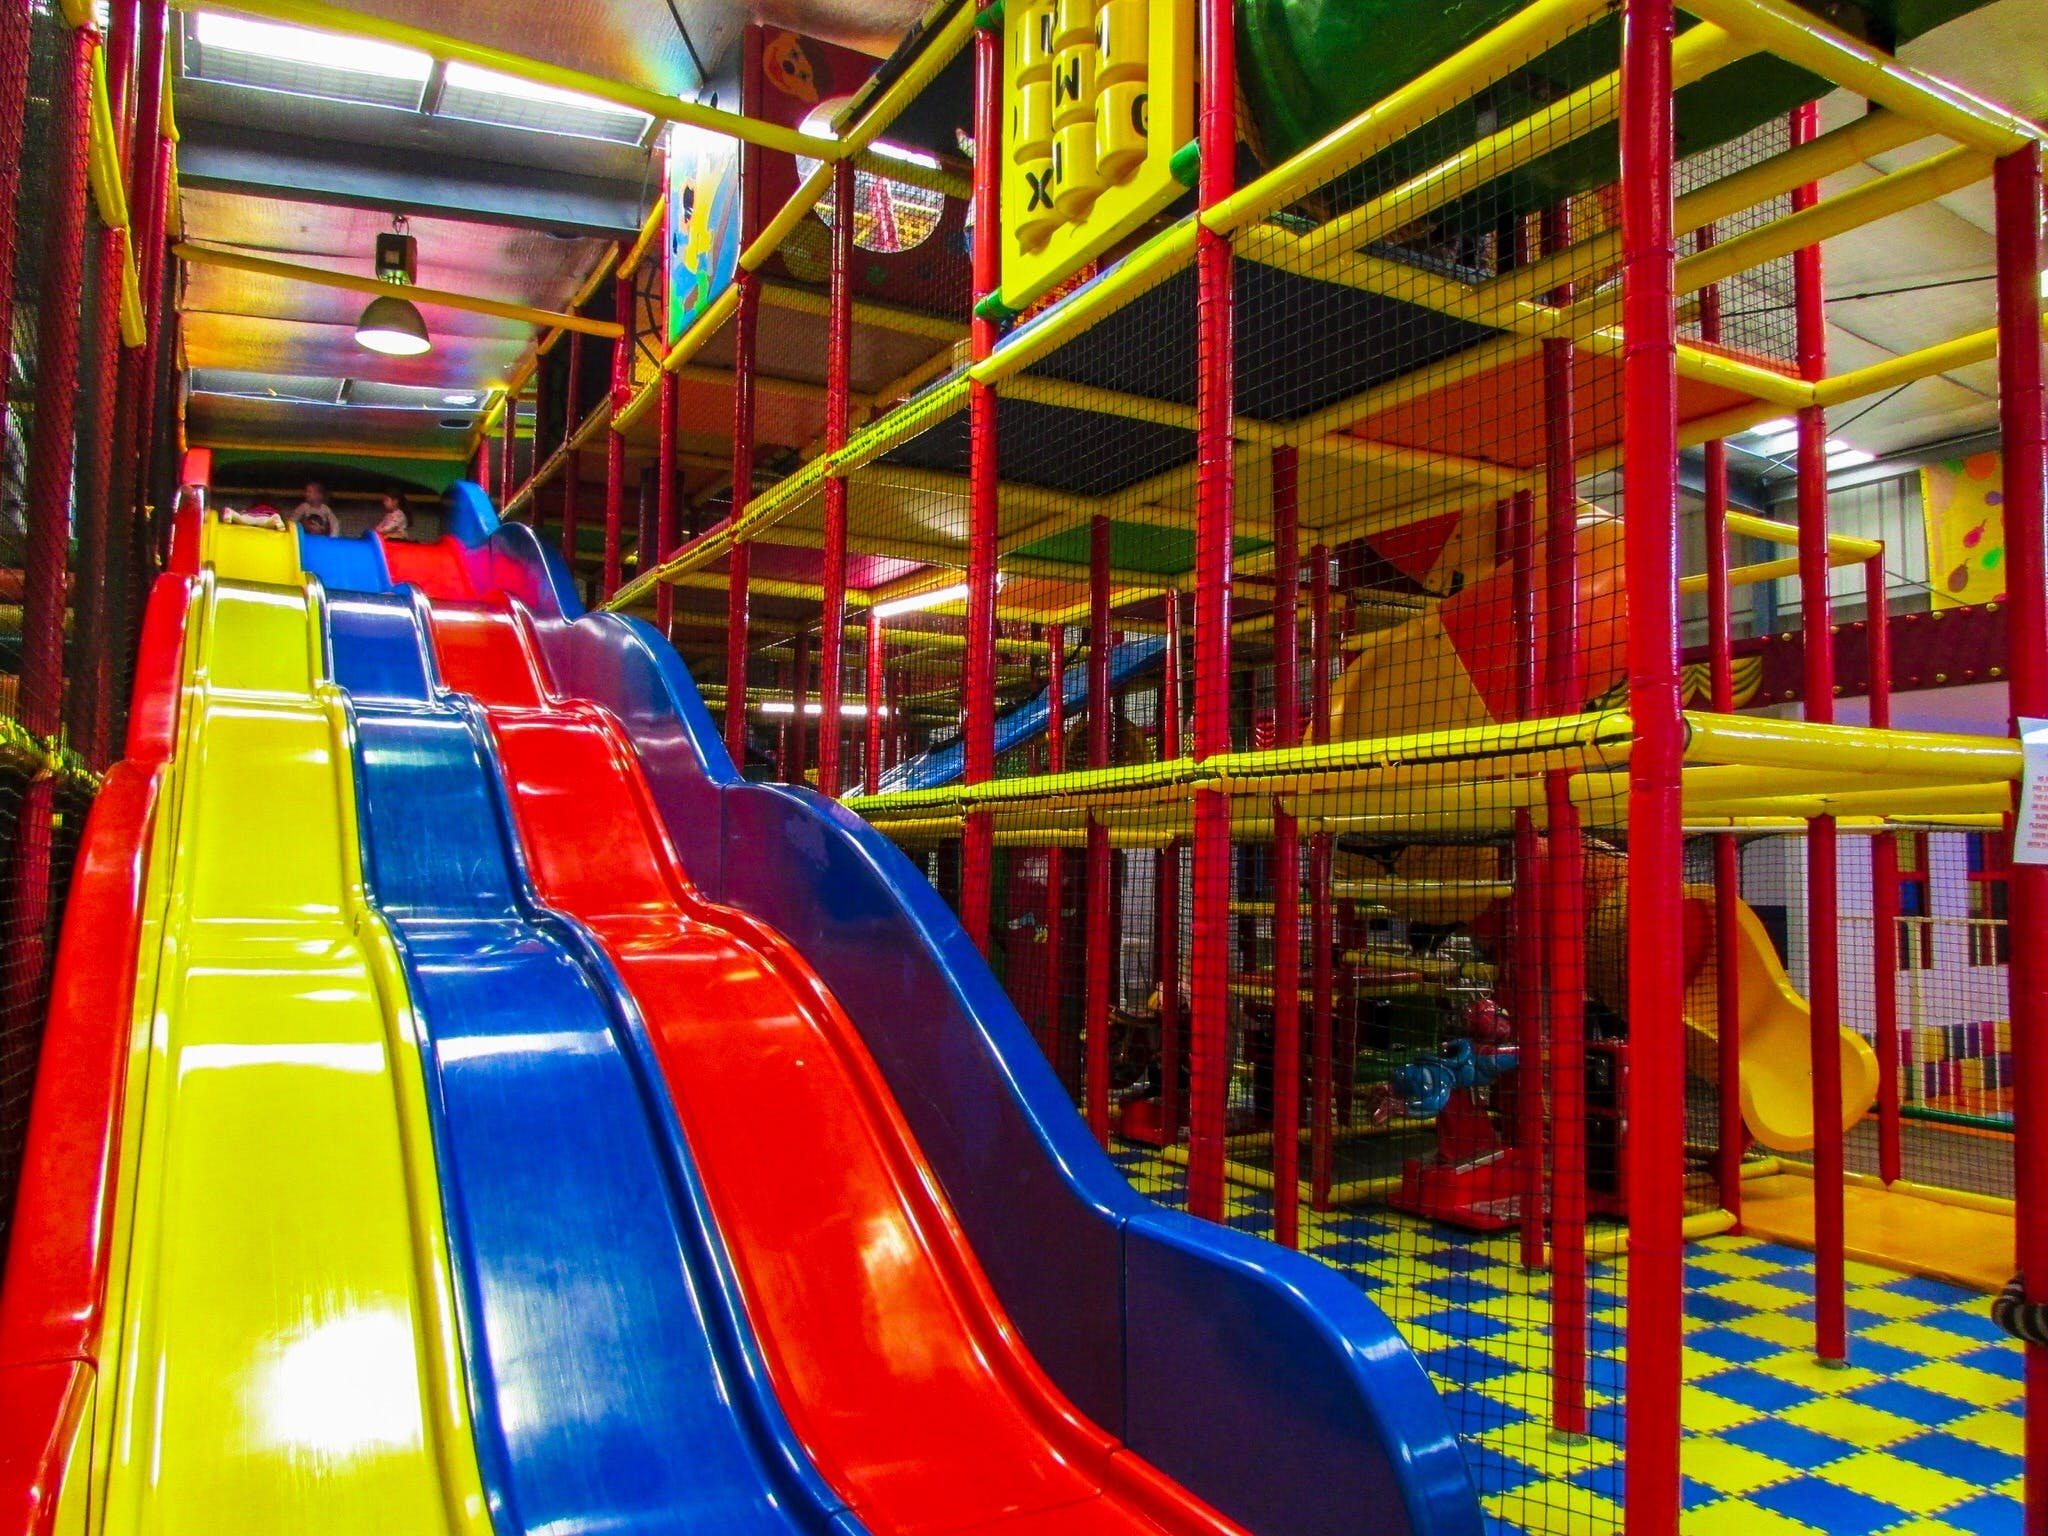 Kidz Shed Indoor Play Centre and Cafe - Carnarvon Accommodation